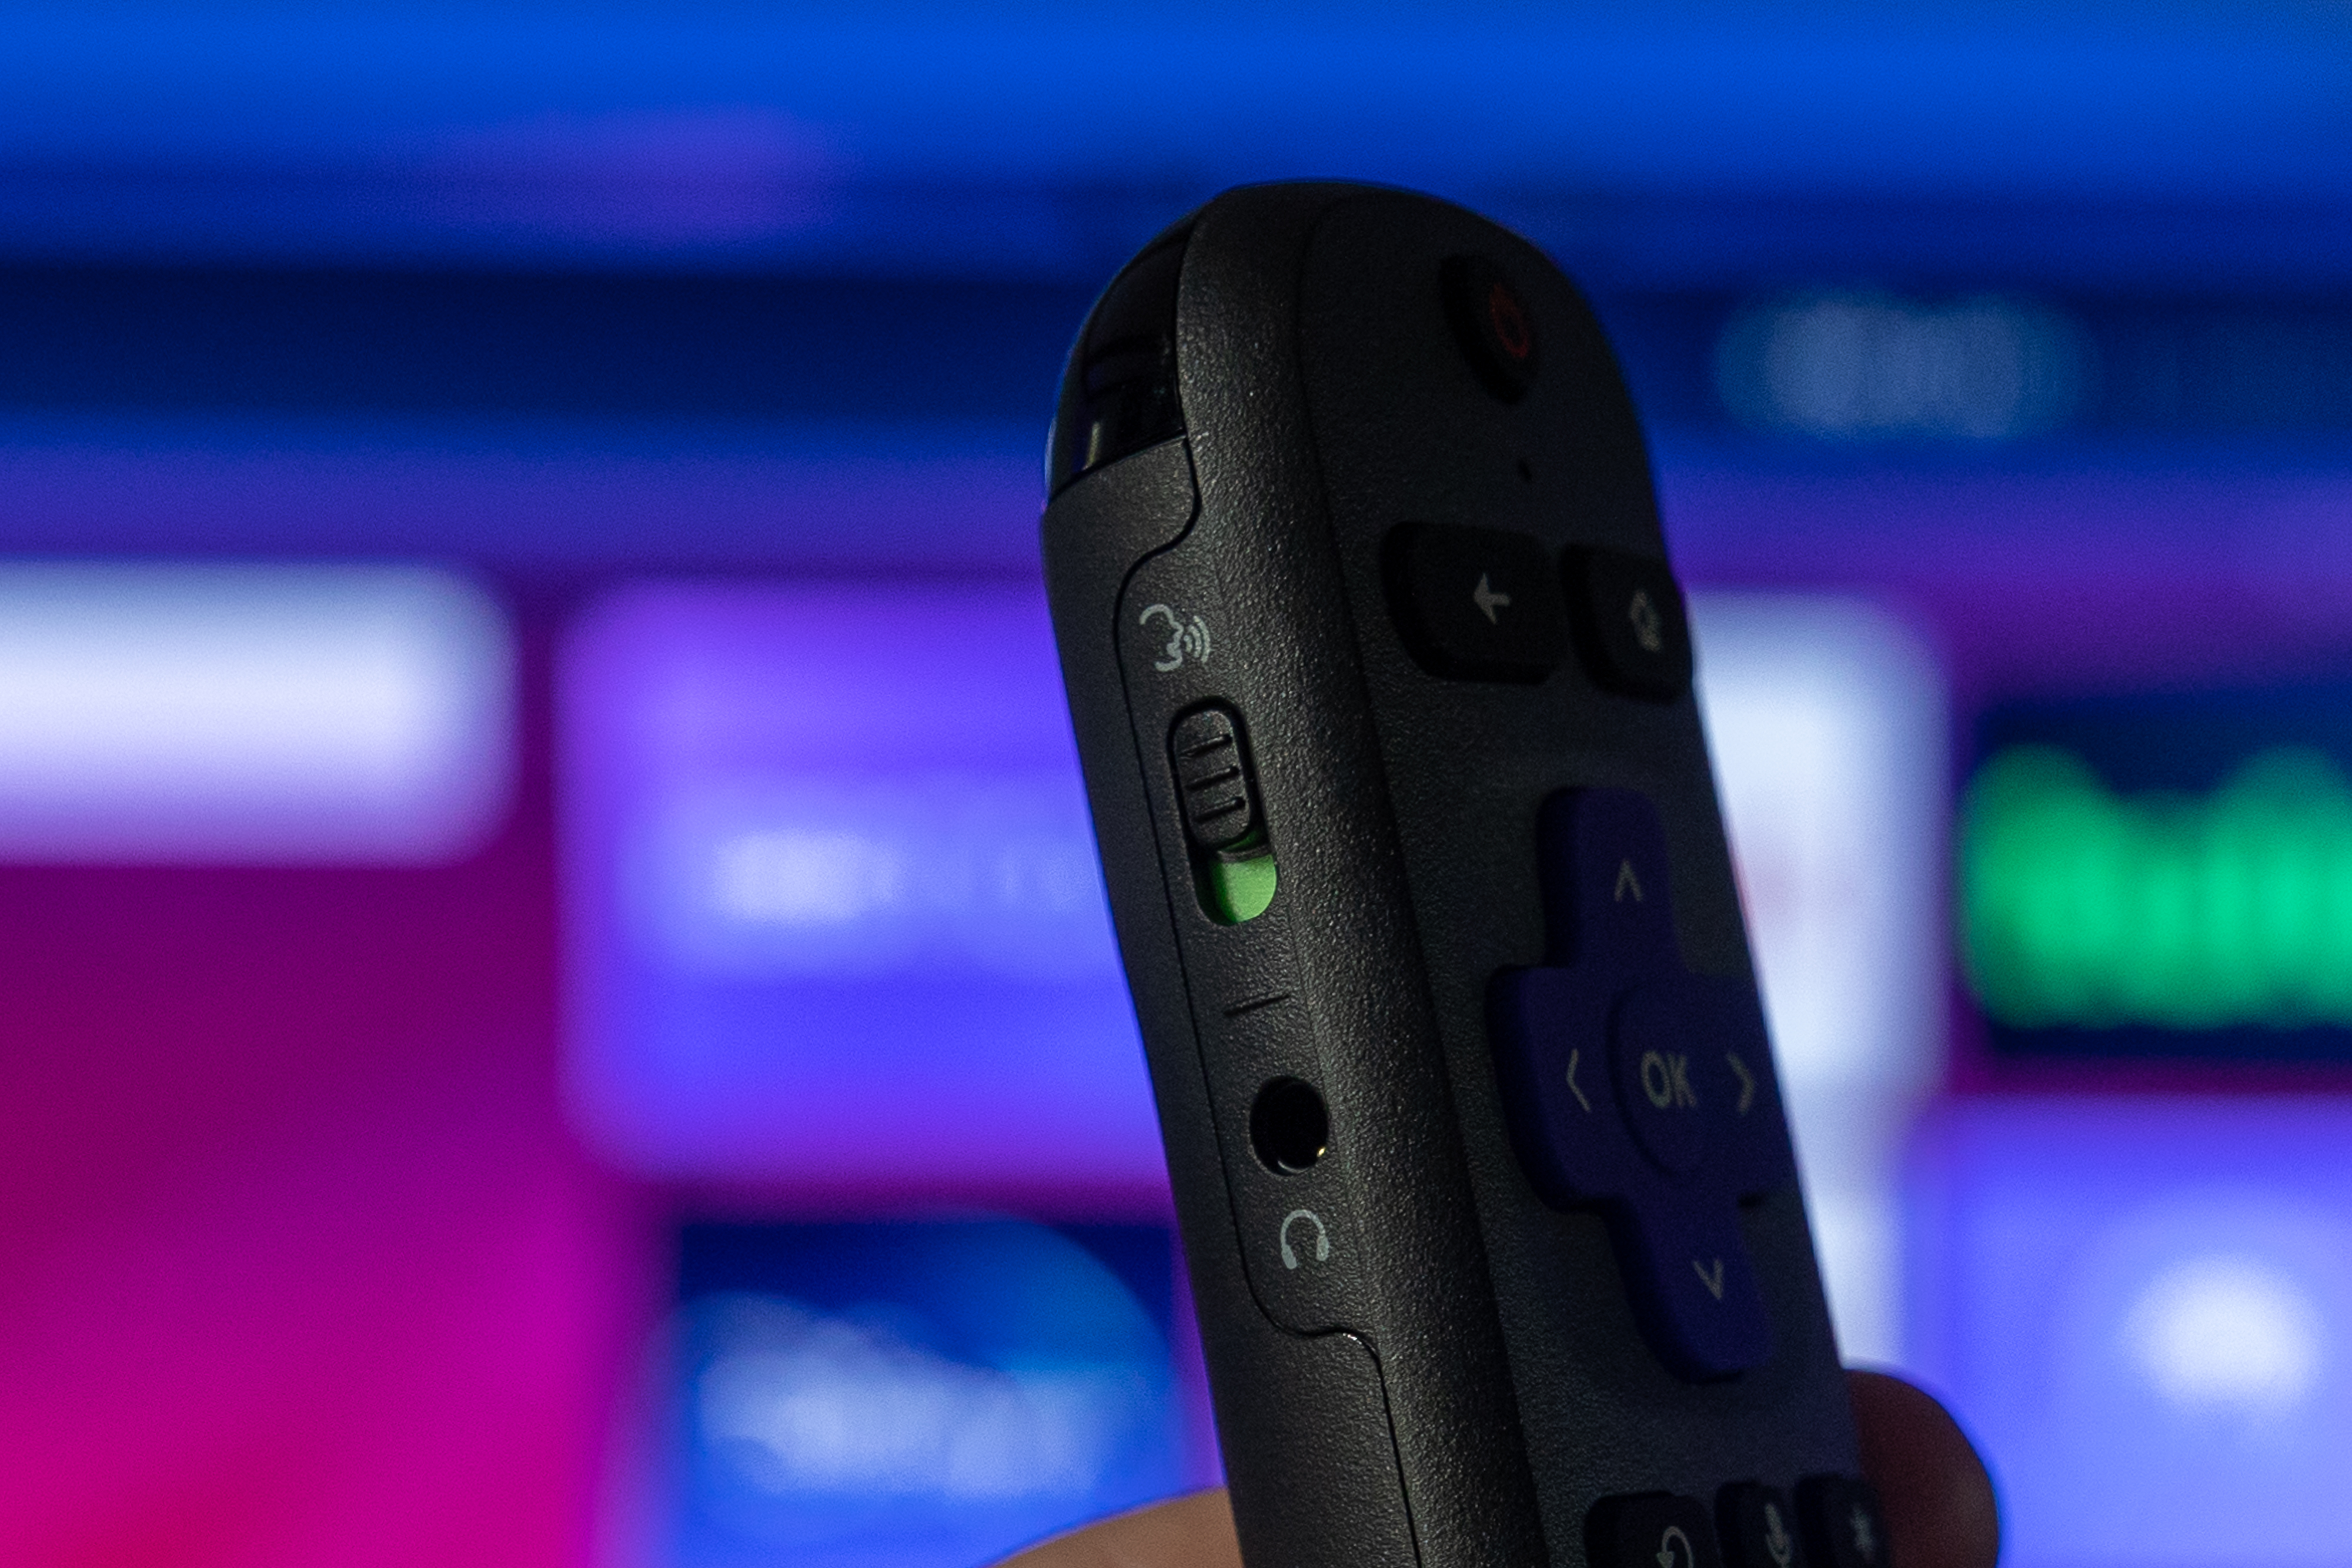 Roku Streaming Stick 4K review: Plug it in